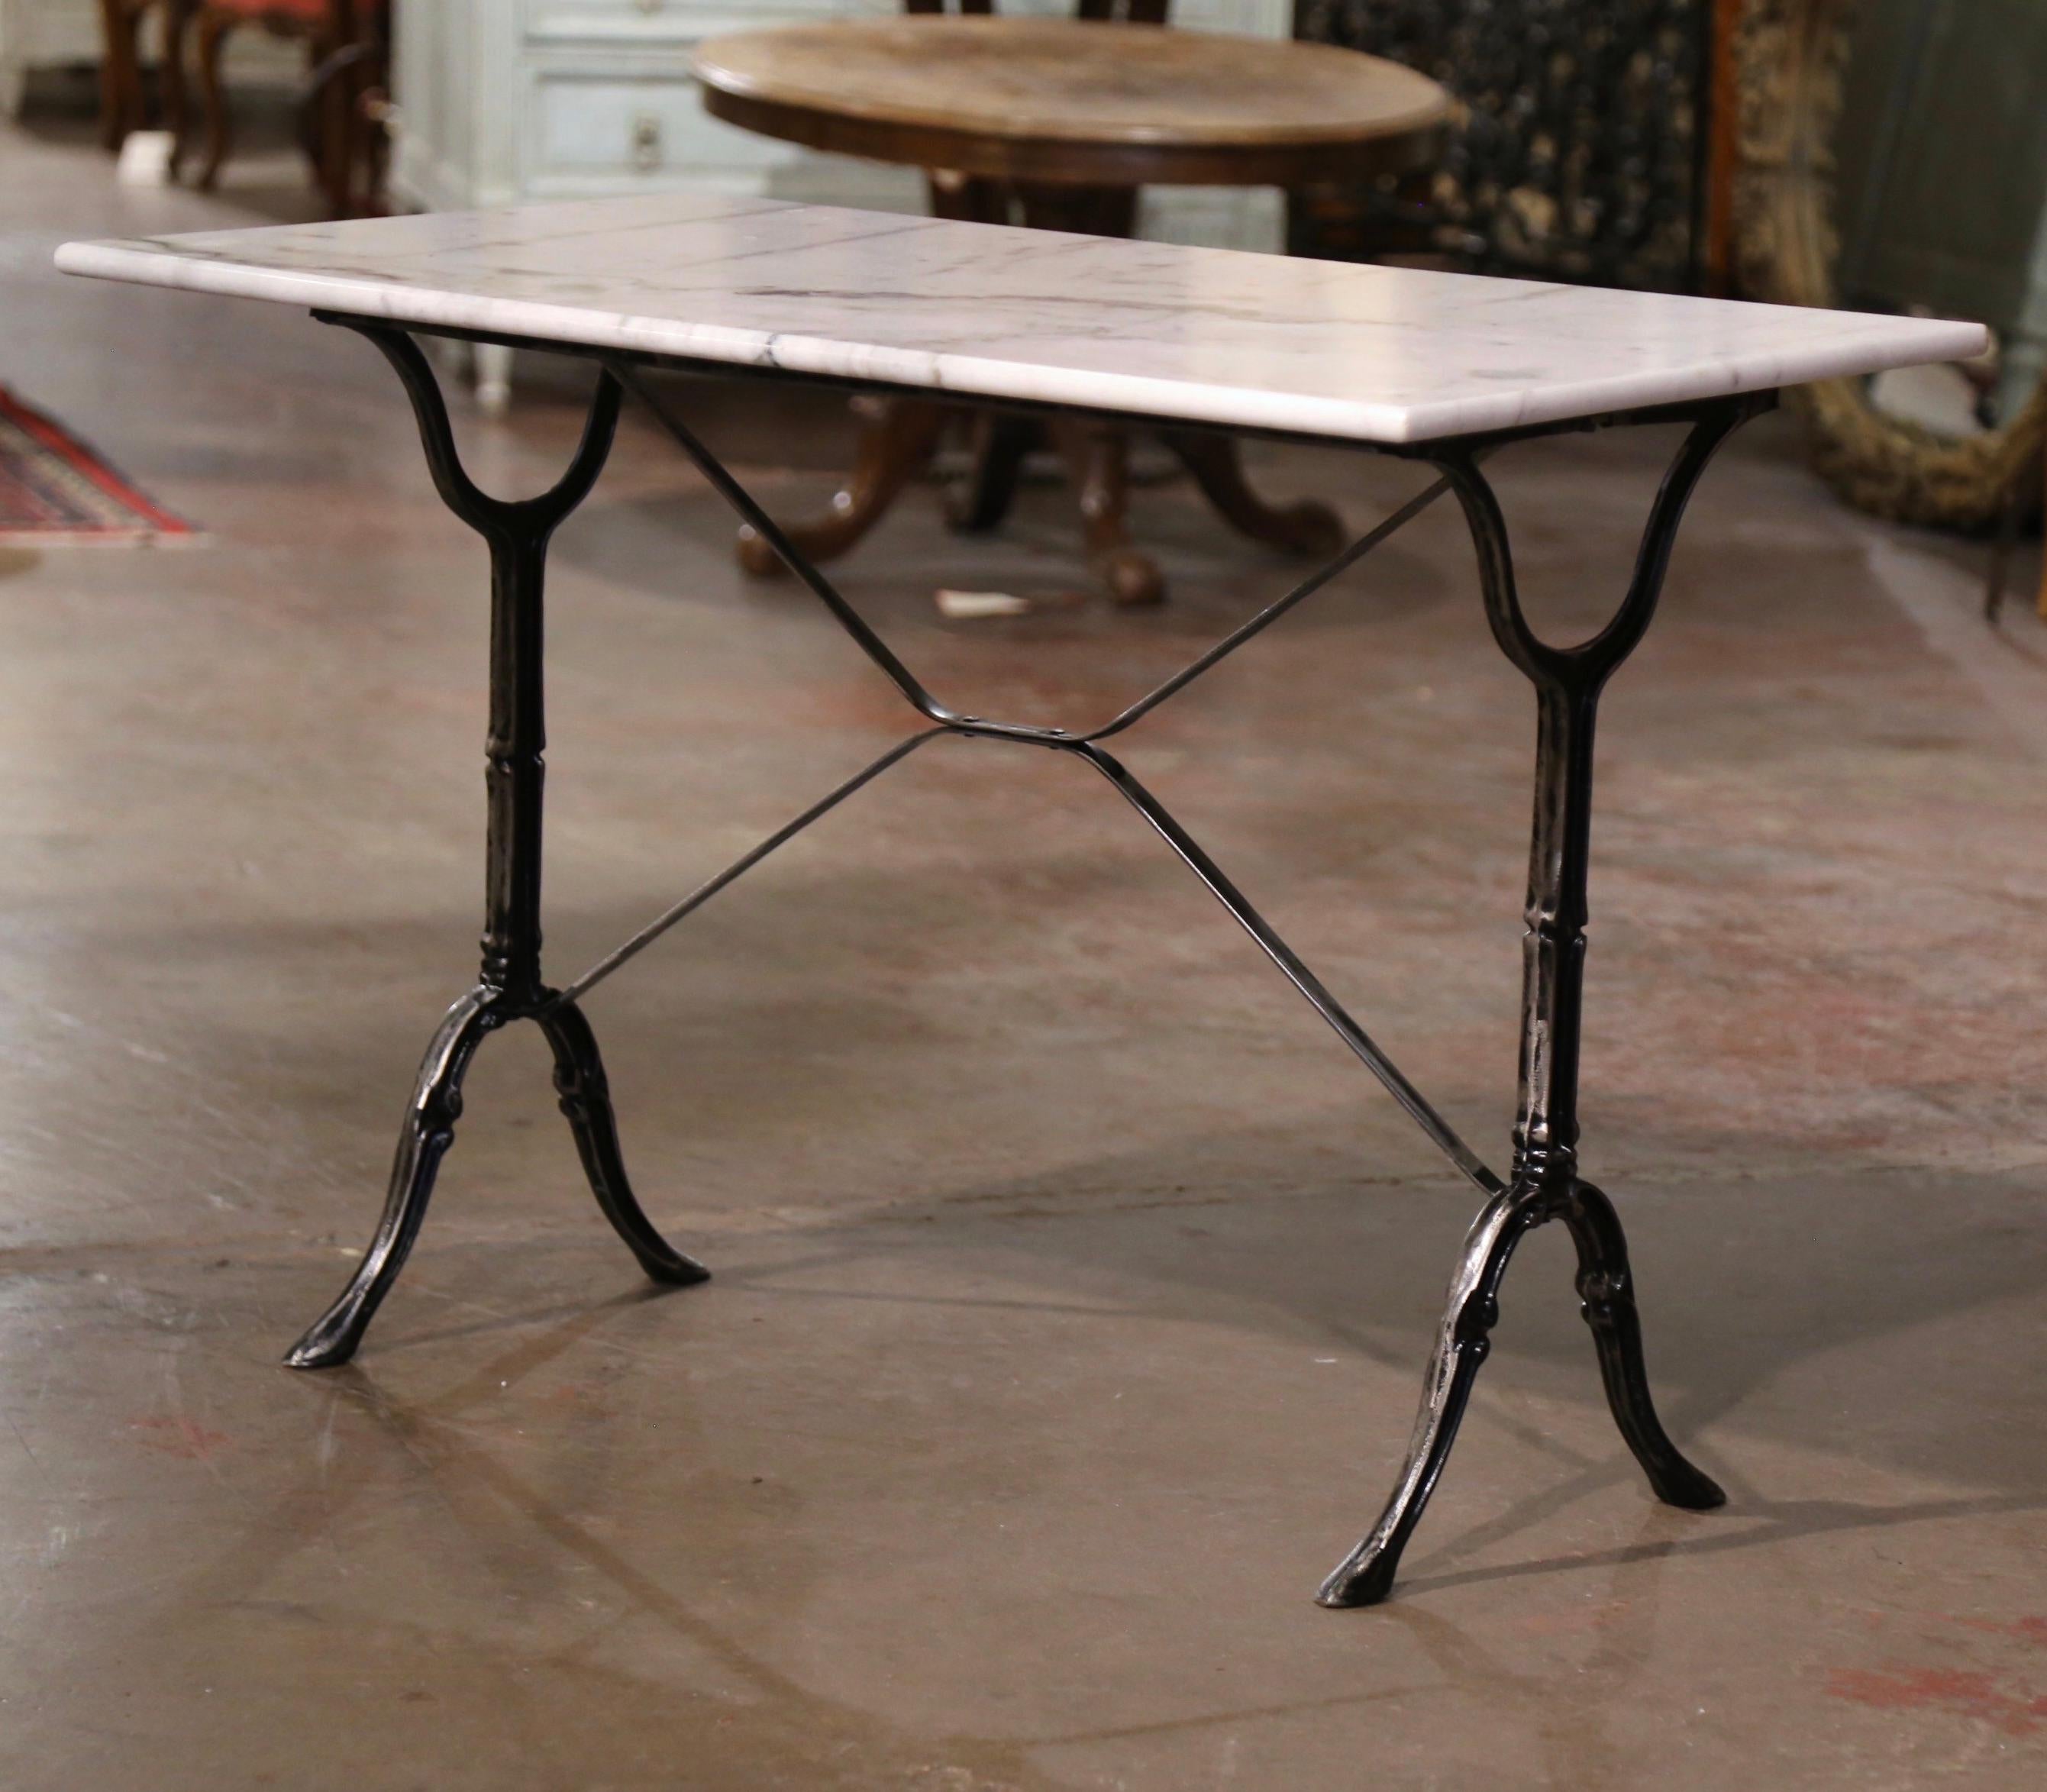 Crafted in France circa 1930, the antique table sits on a cast iron trestle base with elegant scrolled legs ending with hoof feet, and joined together with a double decorative stretcher. The table is dressed with the original rectangular white and